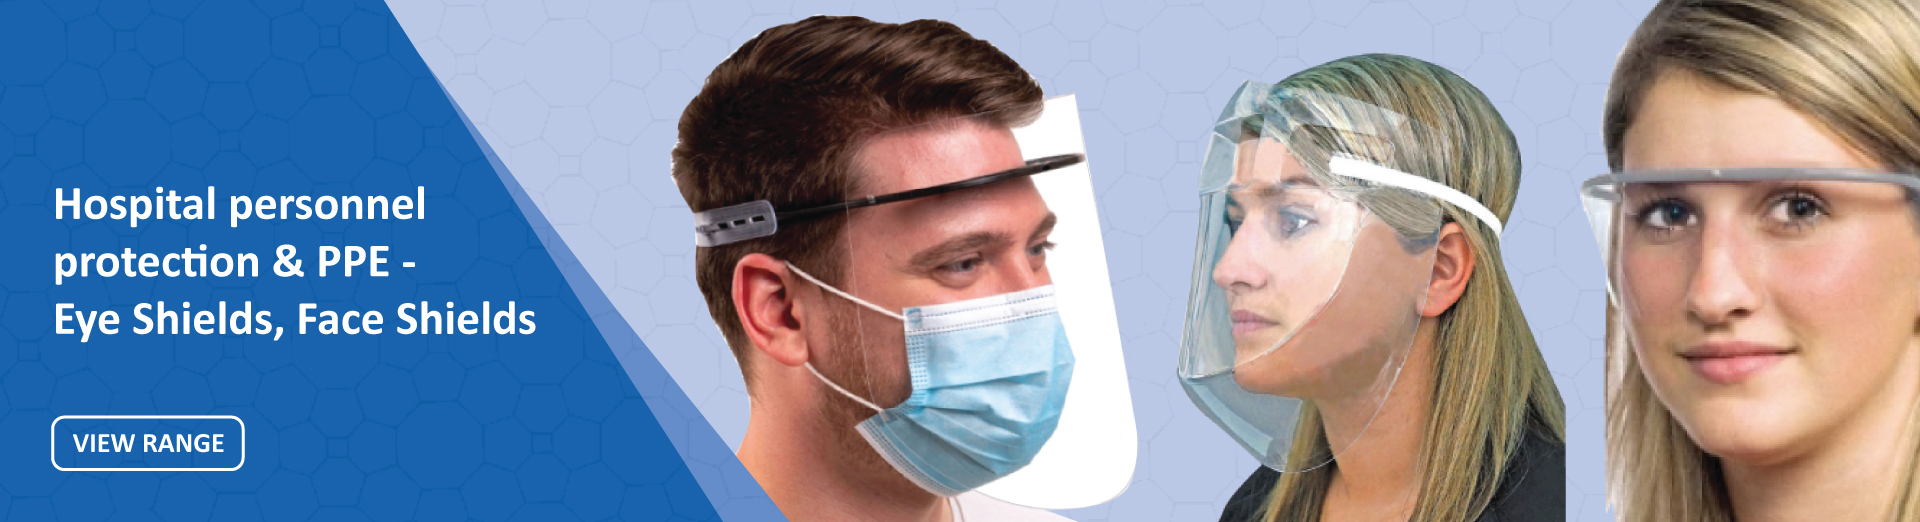 PPE & protection for hospital personnel